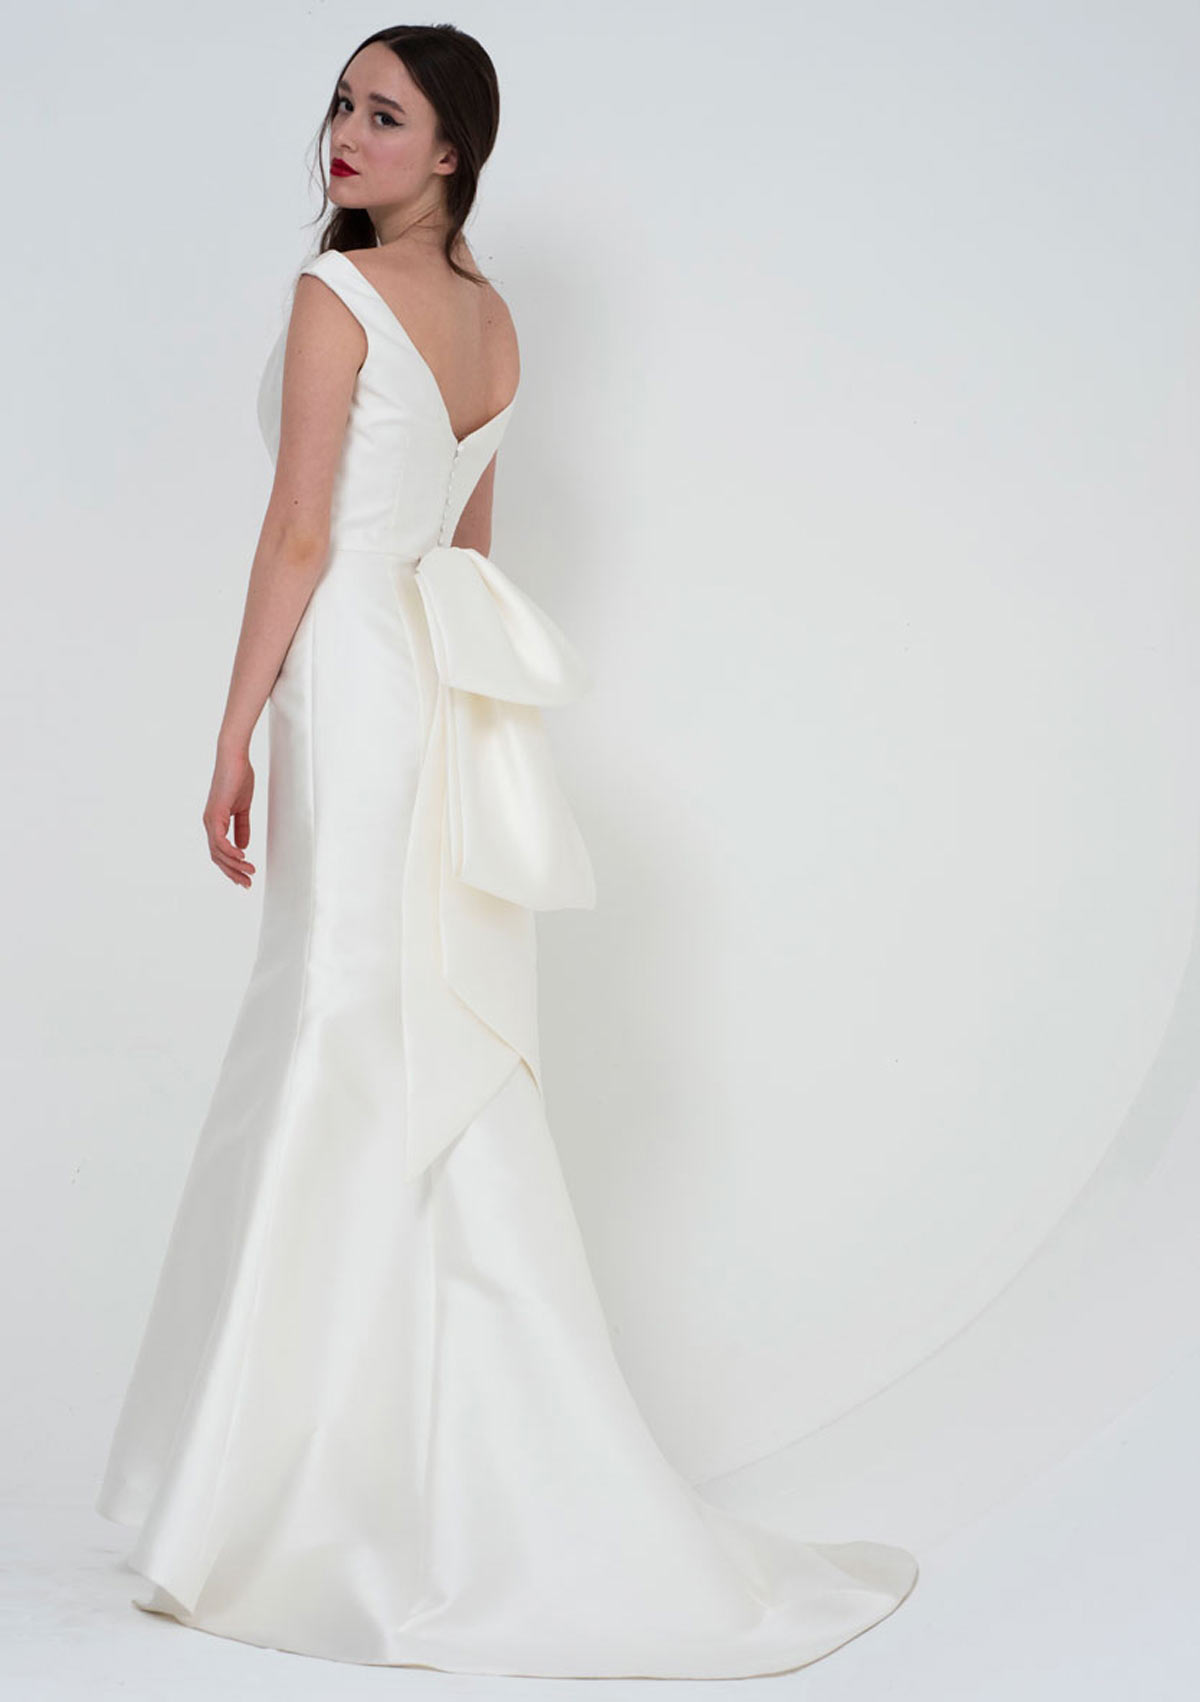 Dress heaven at Bliss Bridal Gowns